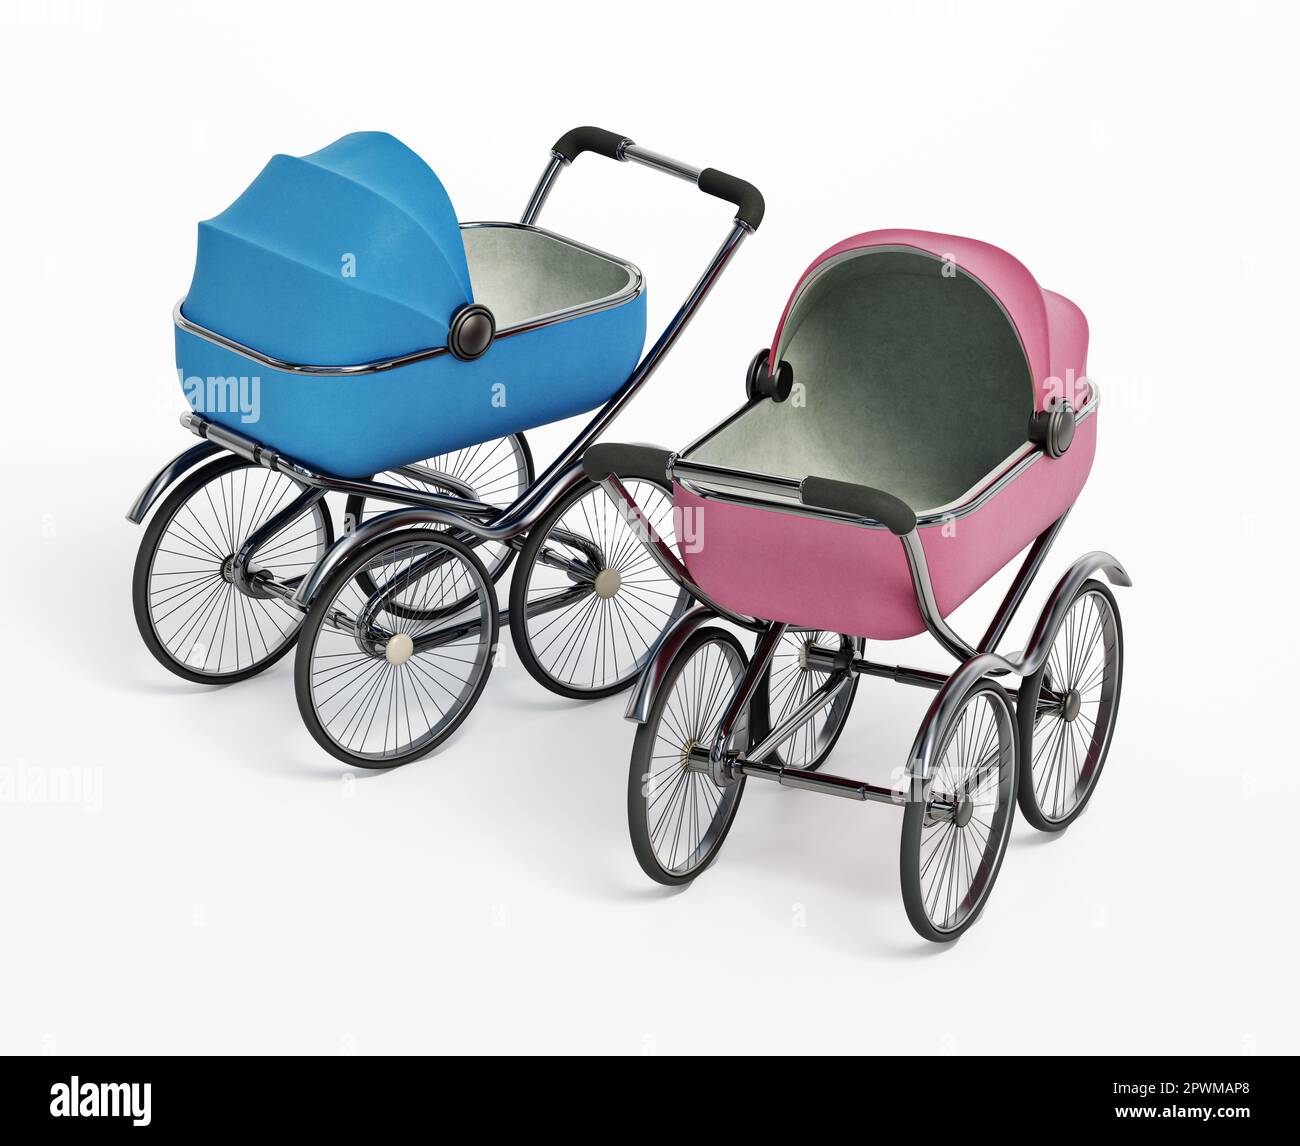 Vintage baby strollers isolated on white background. 3D illustration. Stock Photo